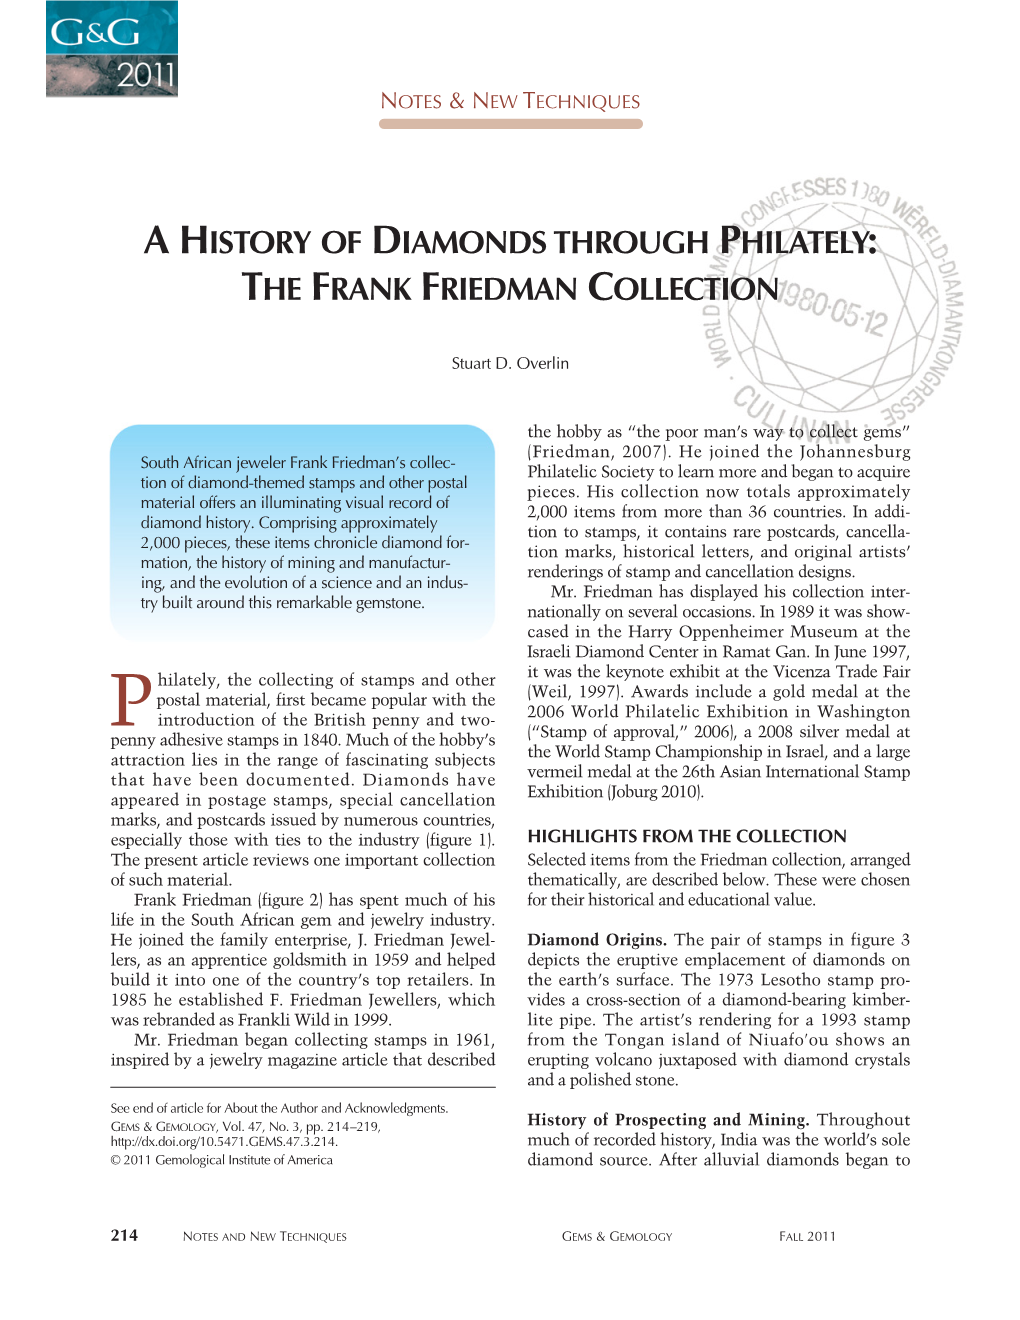 A History of Diamonds Through Philately: the Frank Friedman Collection